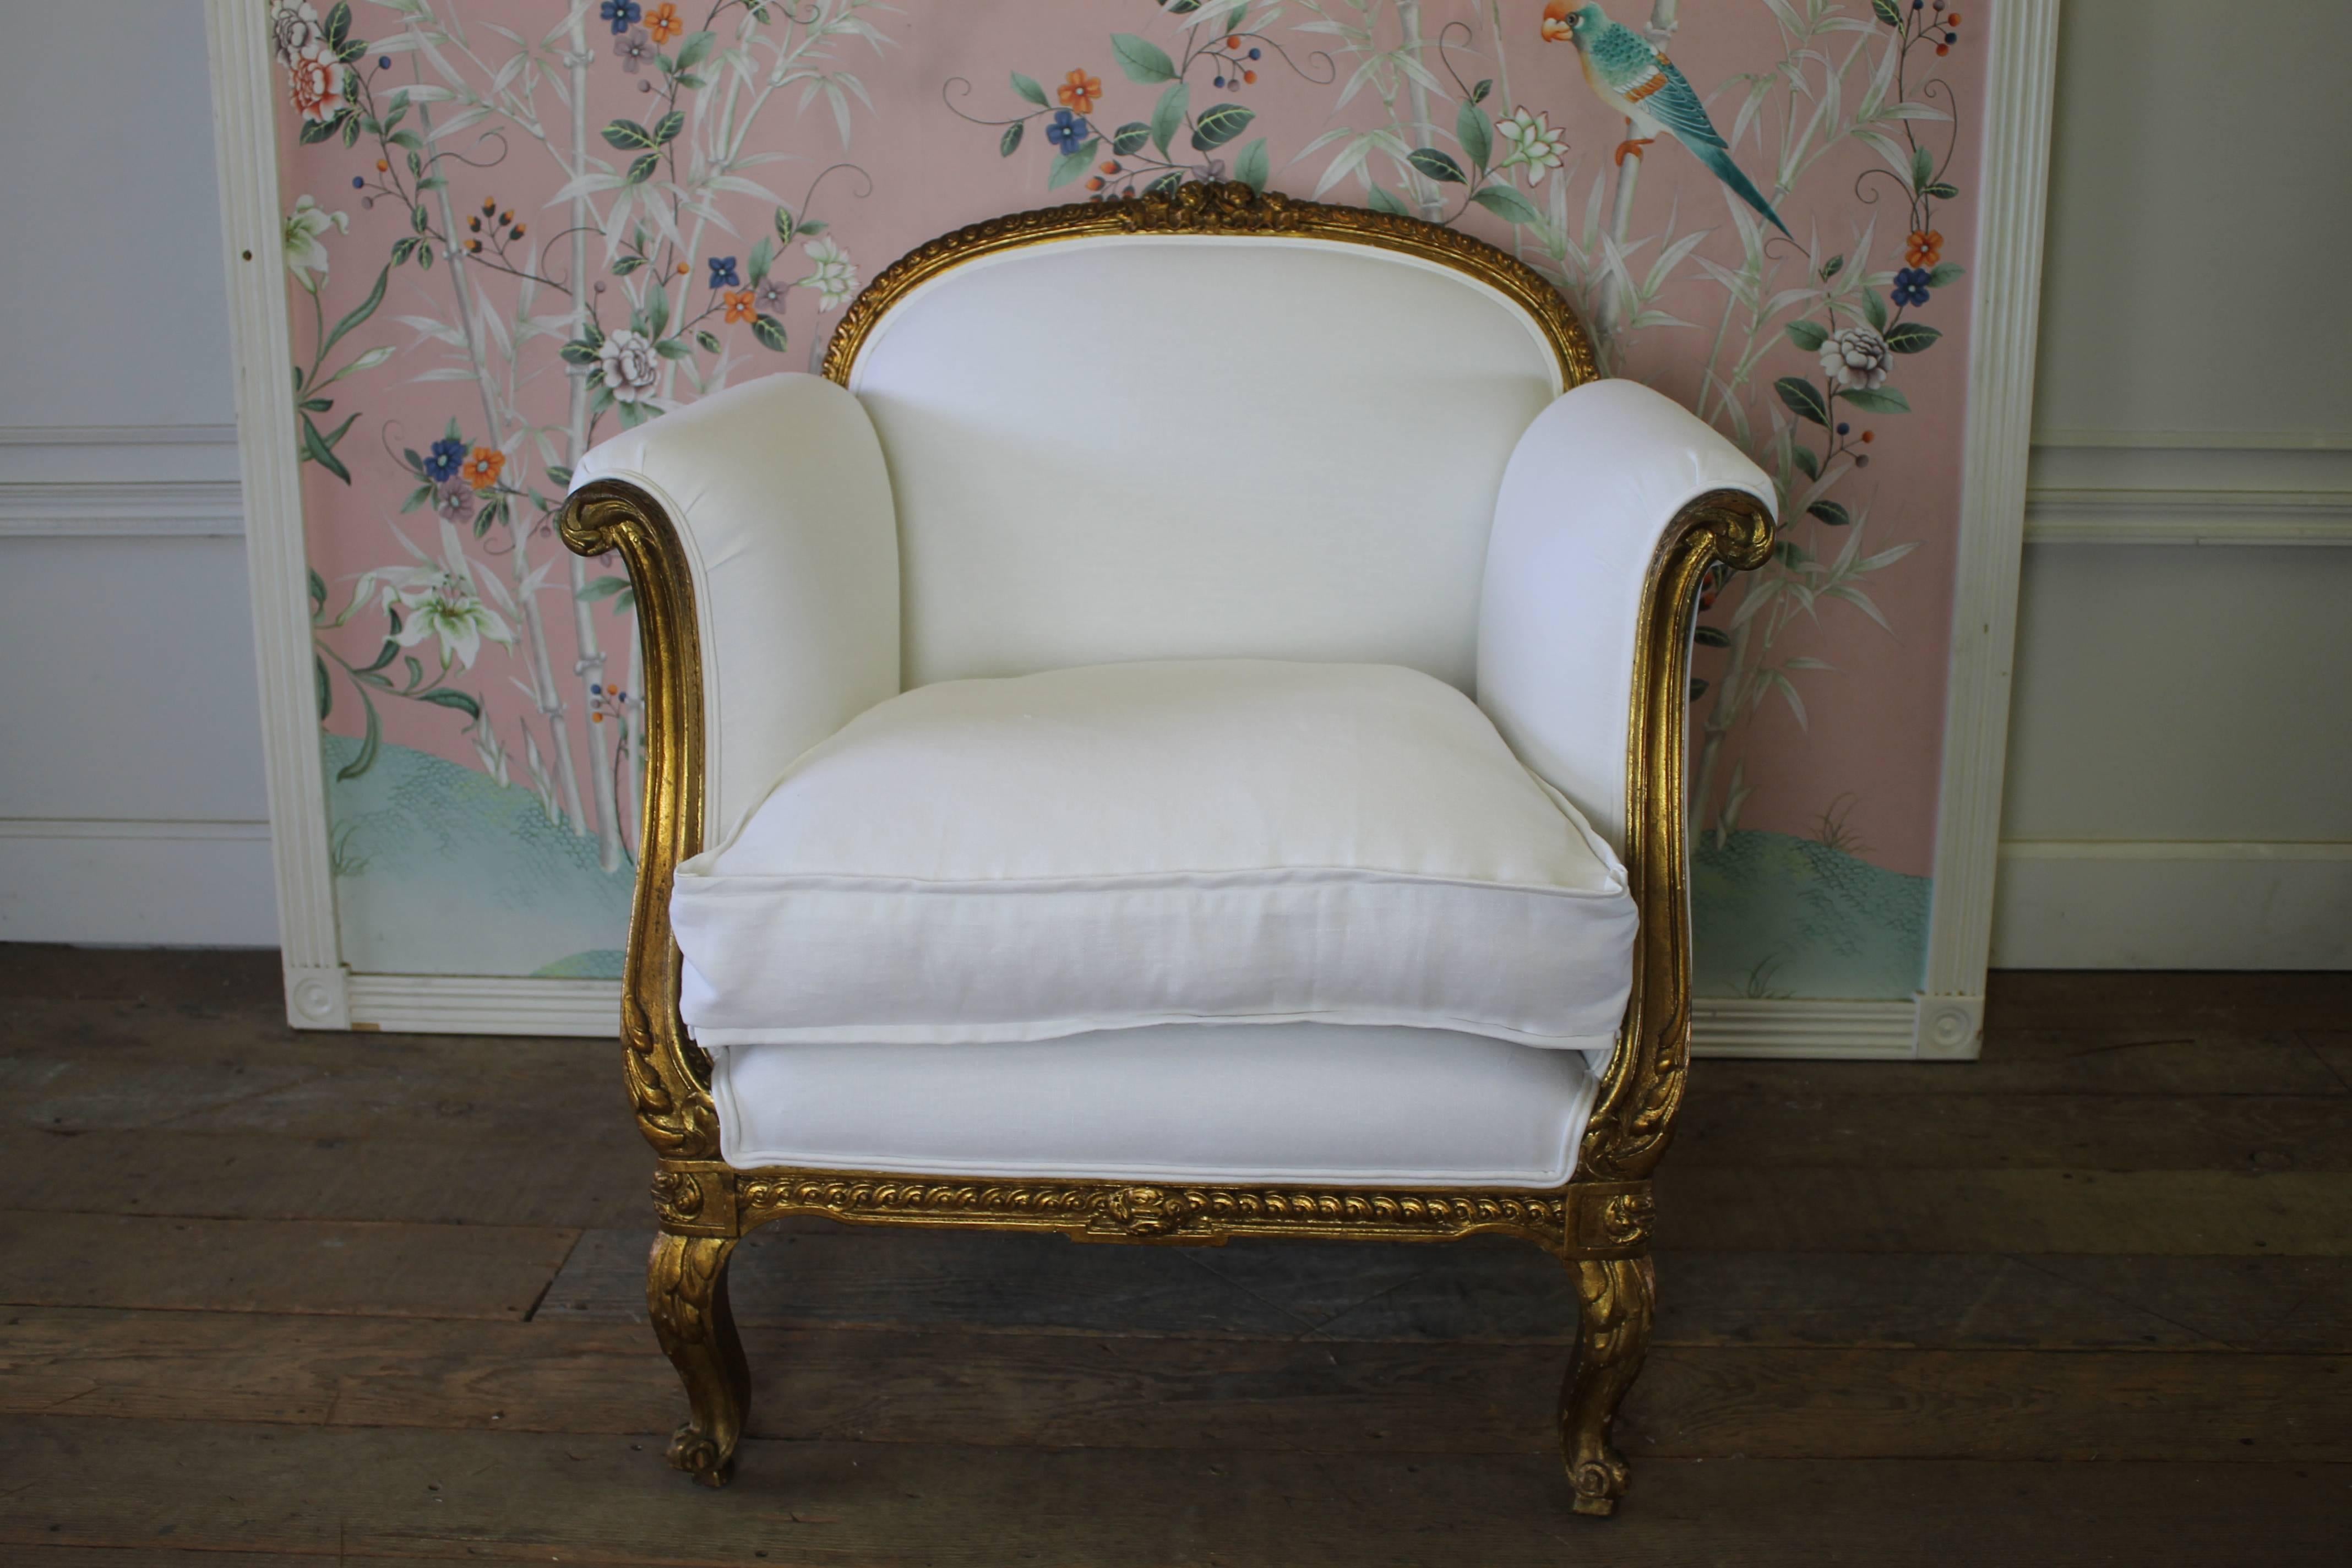 Antique French Louis XV Style Gilded Club Chair in White Belgian Linen
Finished with a double welt trim, this white Belgian linen has been prewashed giving it a very soft hand, the seat cushion is a plum down wrapped, with slip covered seat.  The